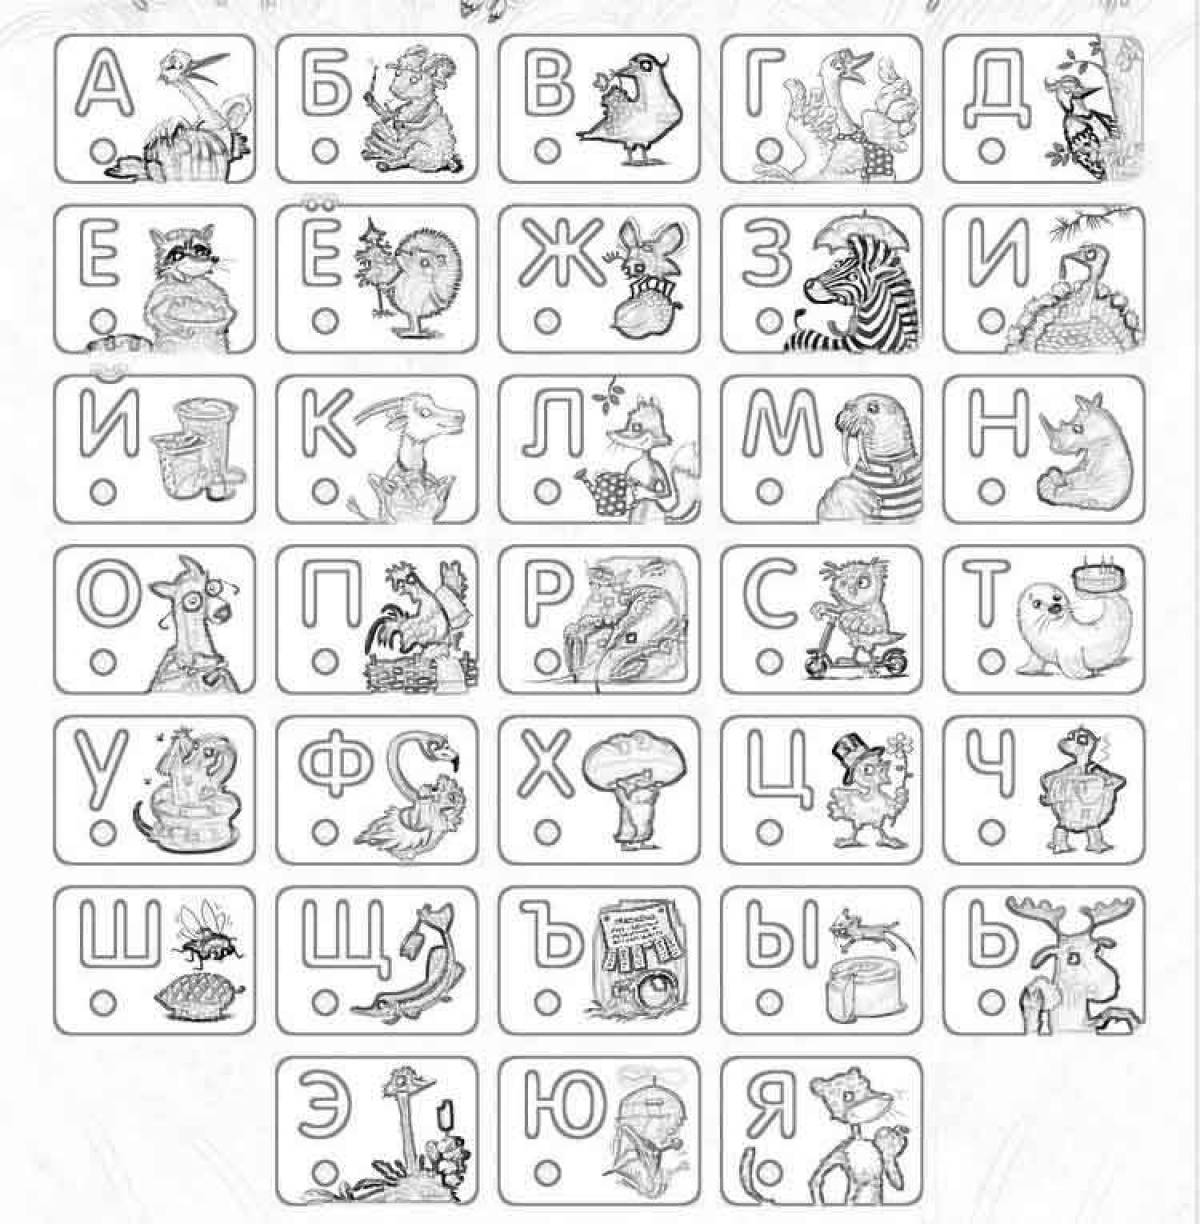 Coloring book inspiring knowledge of the alphabet